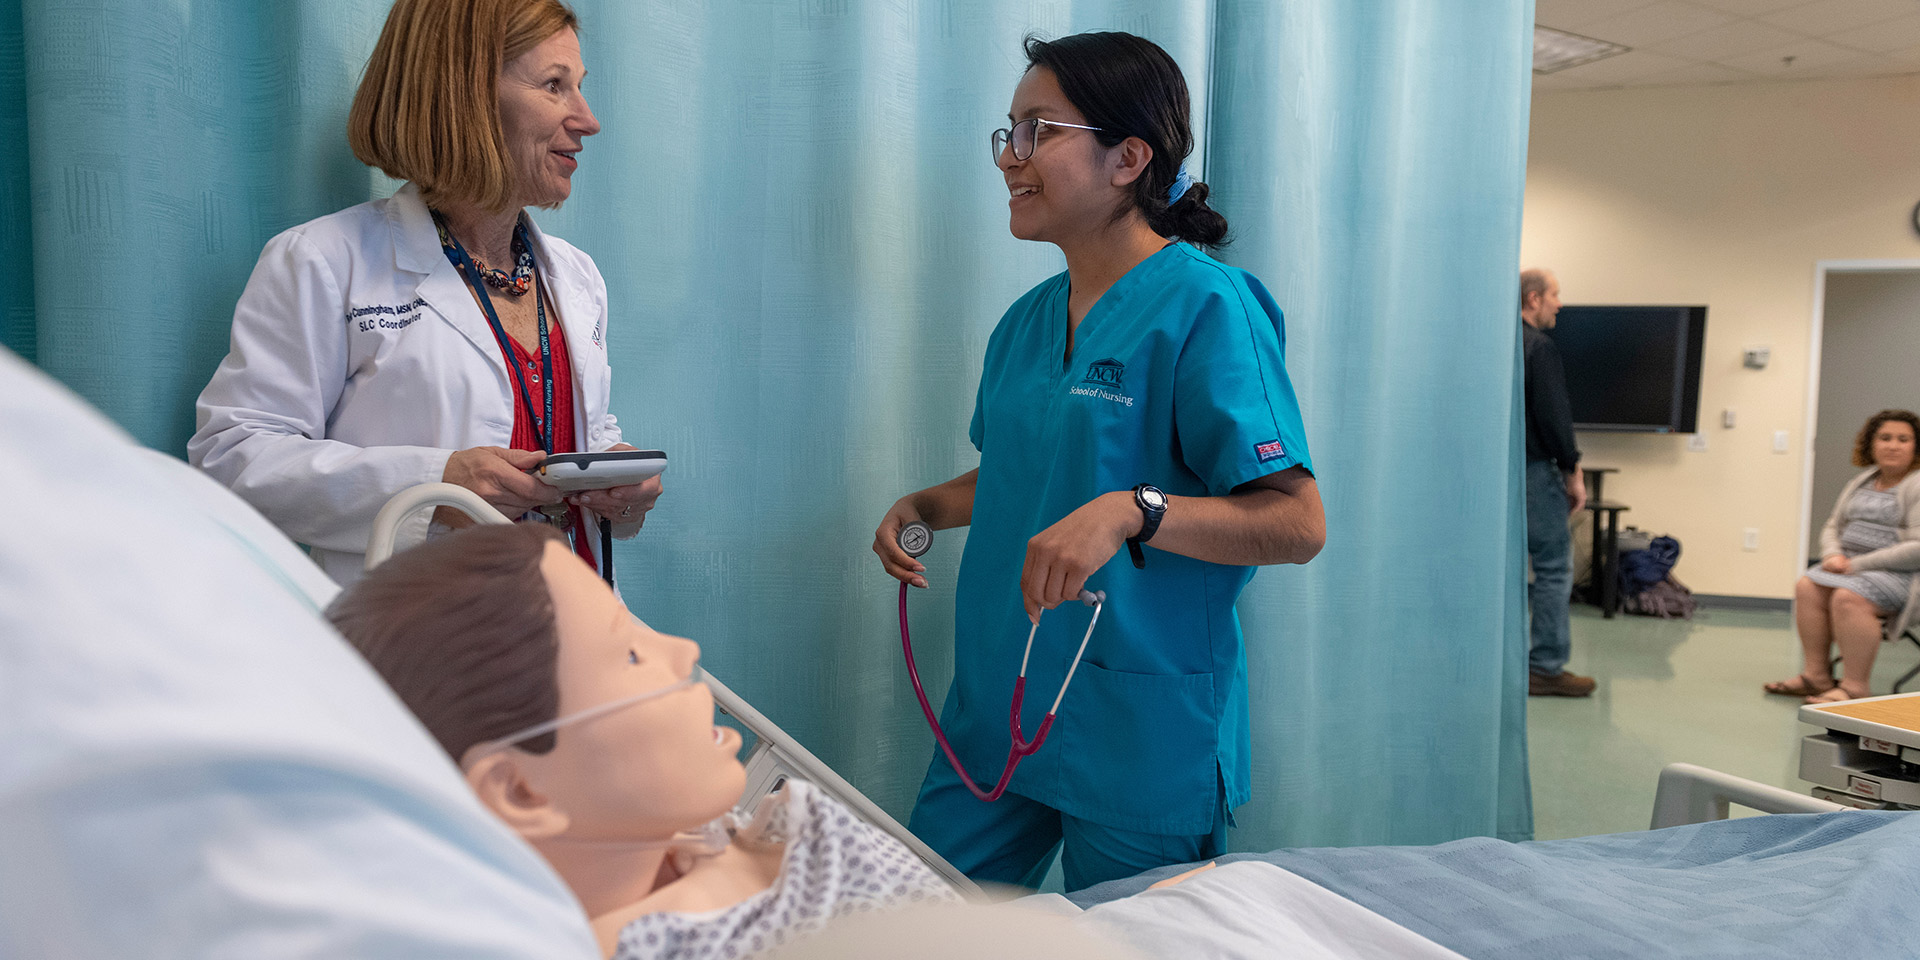 A nursing student and a doctor talk beside a manakin dressed as a patient